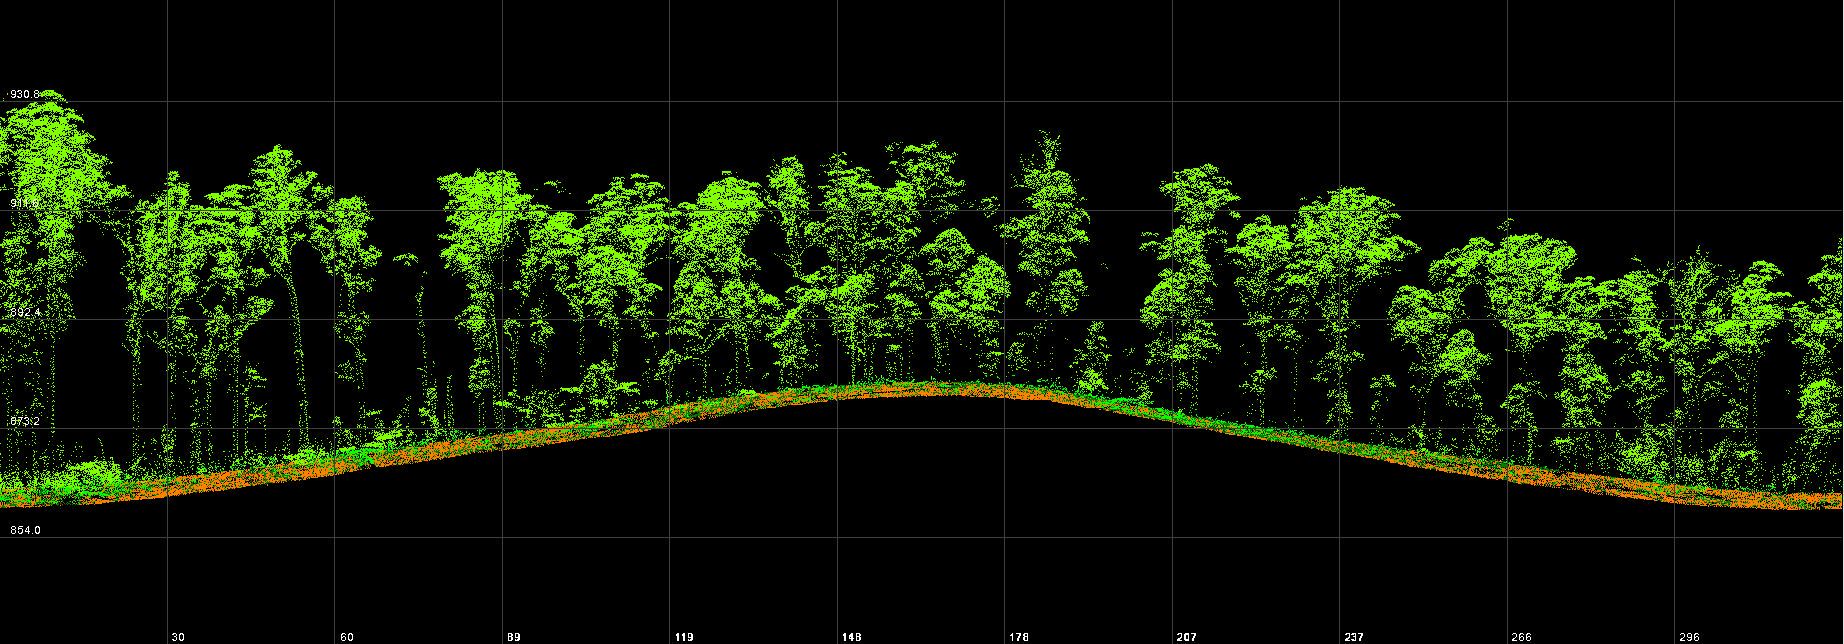 A point cloud profile view of a section of forest in East Gippsland. The trees are shaded in green, the ground in browns and greens, and black for negative space around the natural features.